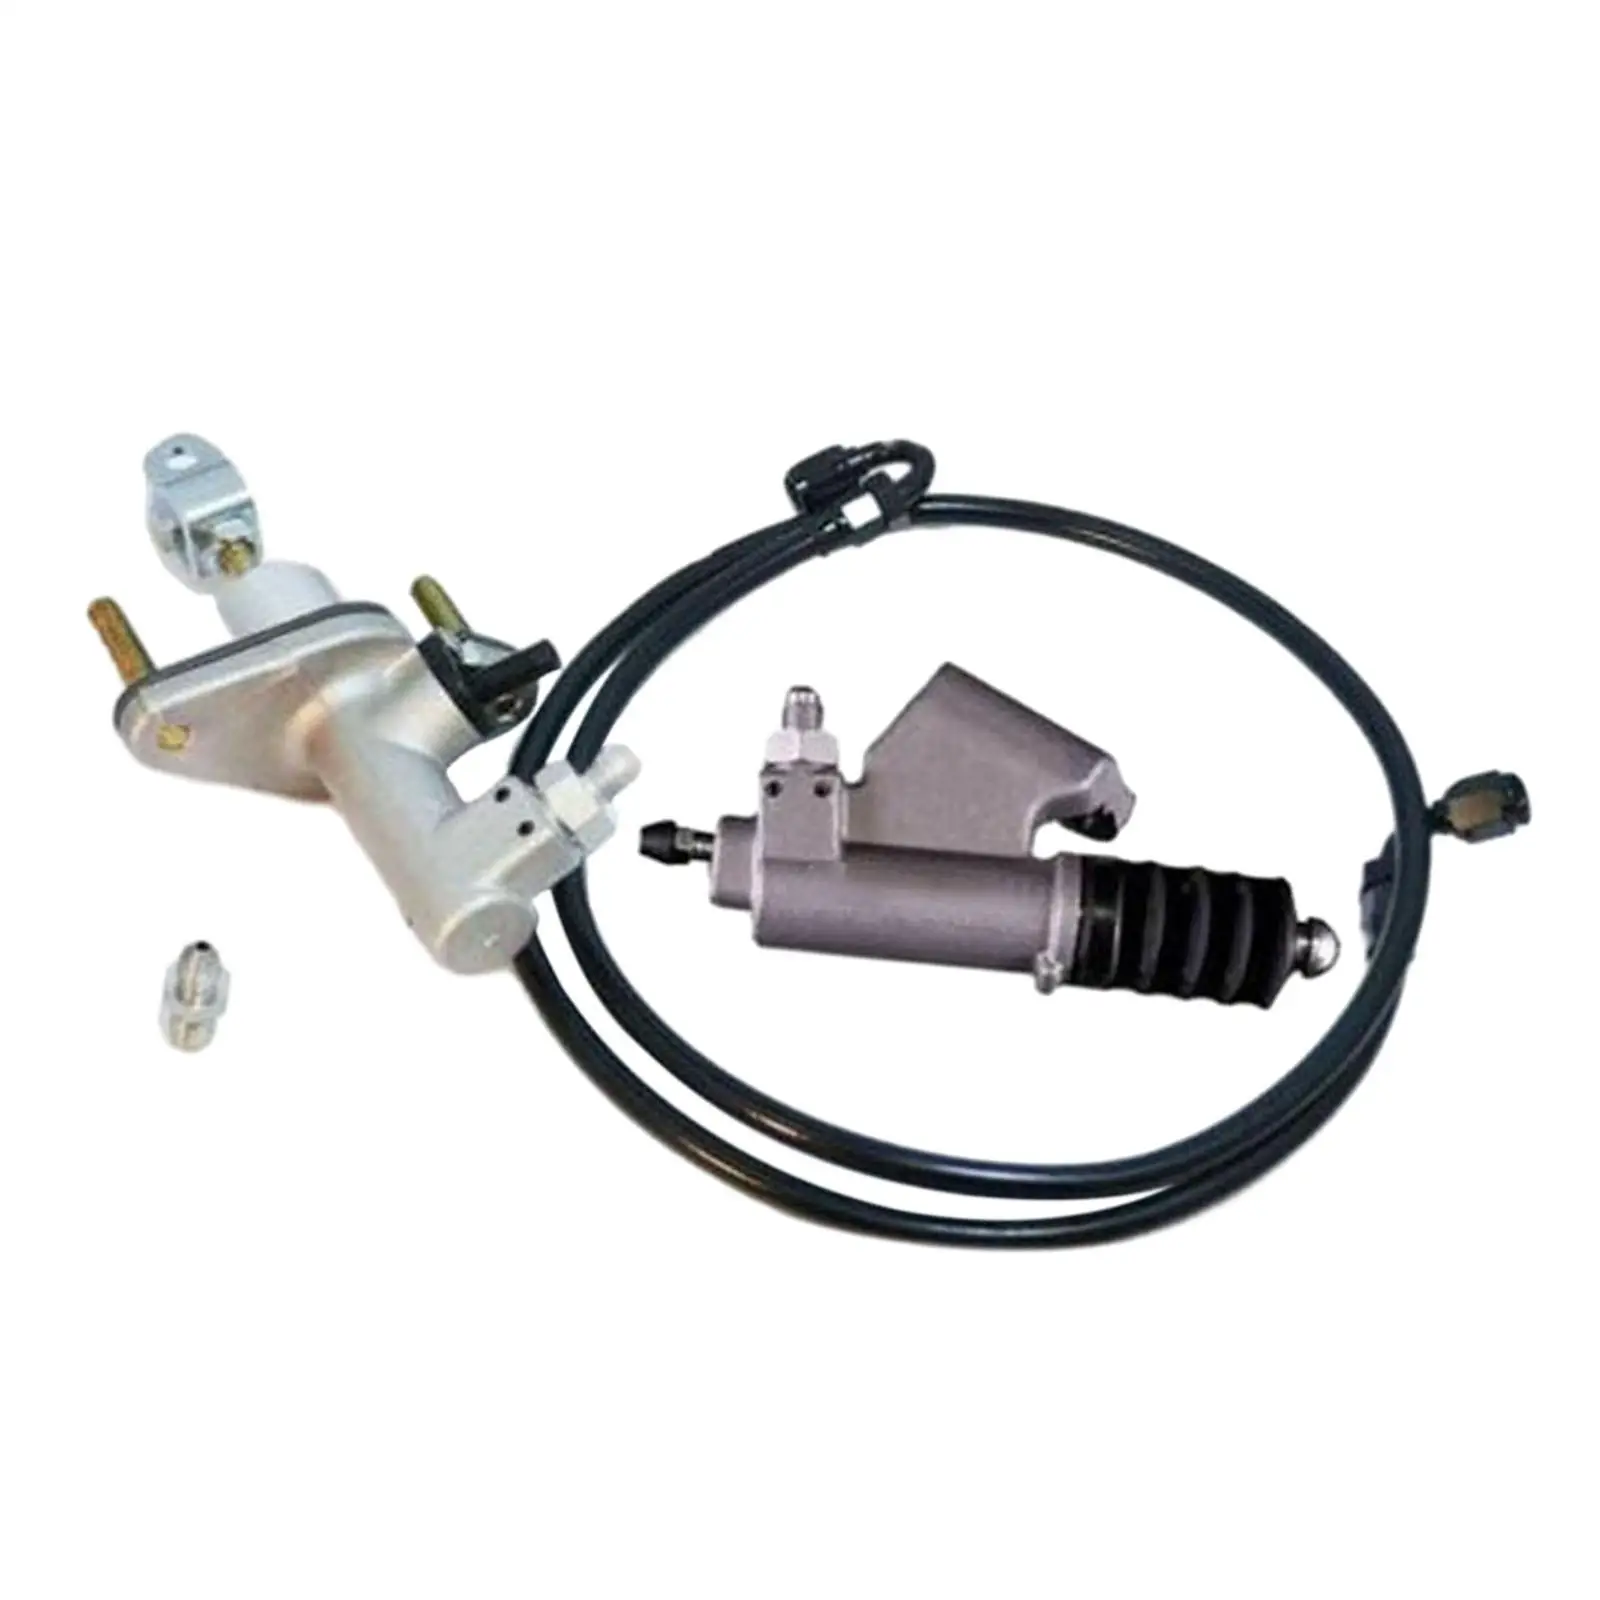 Ktd-clk-kms Complete Master Cylinder Slave Kit for Acura Assembly Automobile